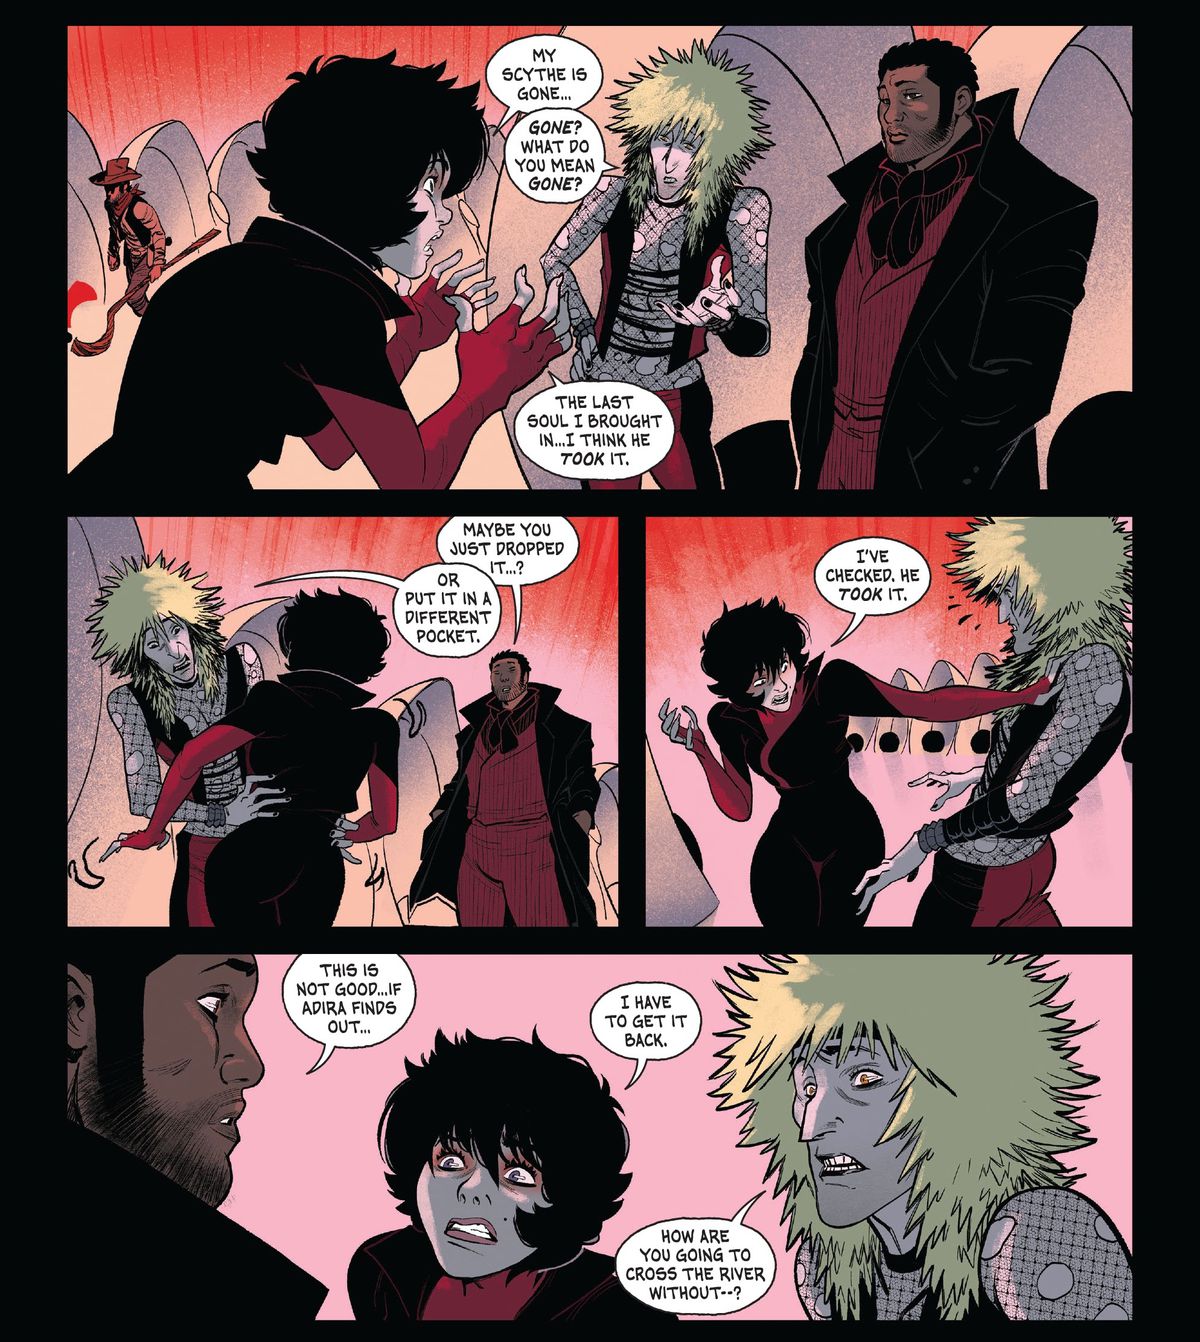 Three grim reapers, one a petite goth woman, another a skinny punk man, and a black man in an Elizabethan era coat and cravat, discuss how the woman has lost her scythe with the dread of low-level employees who’ve screwed up on the job in Grim #1 (2022). 